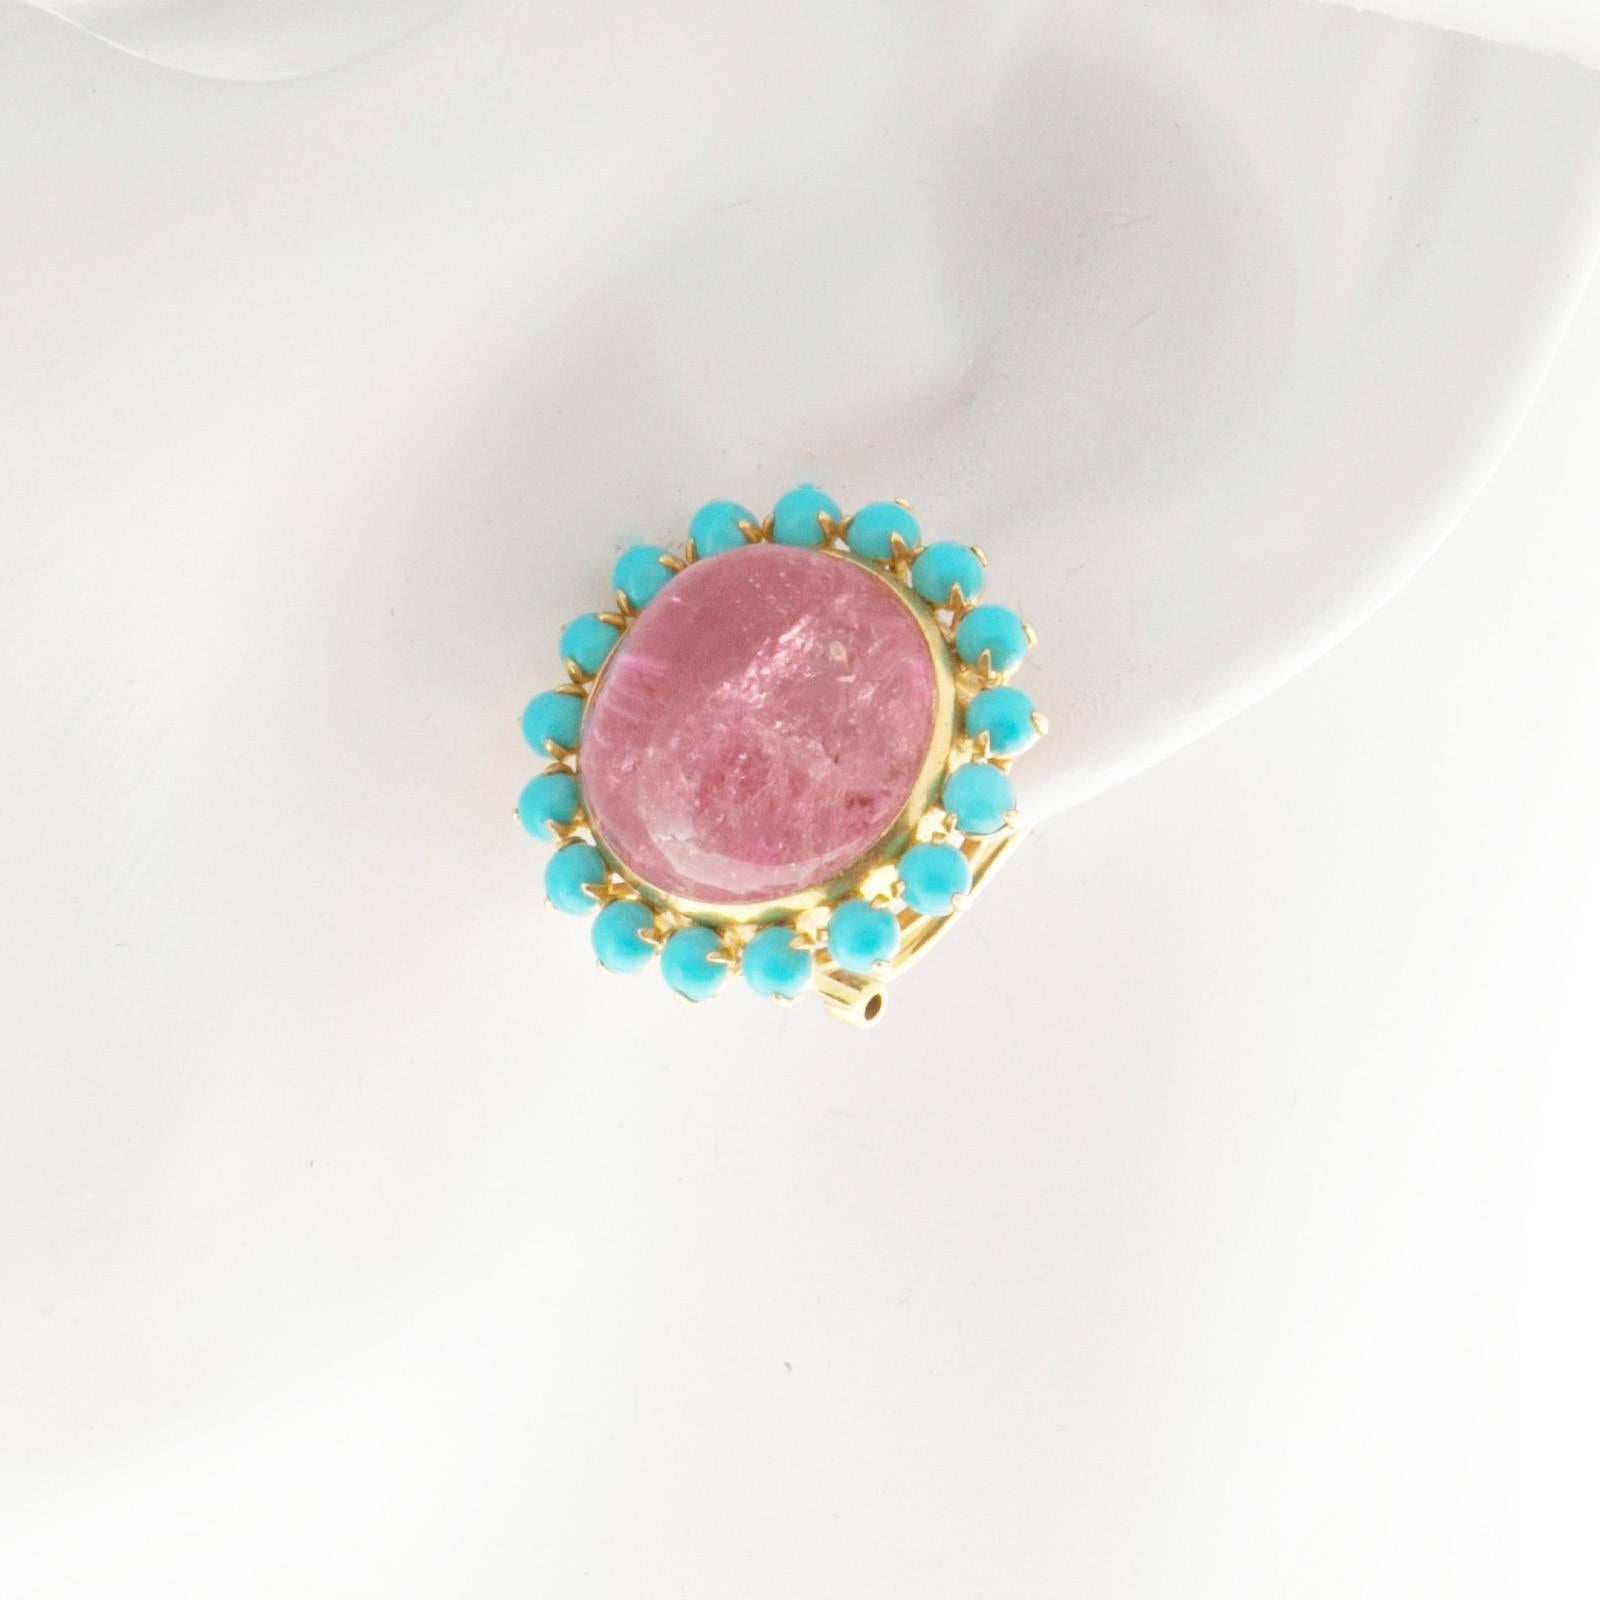 1950’s clip post 15mm pink Tourmaline Persian untreated Turquoise earrings. Moderately included Tourmaline. Persian Turquoise.

2 round cabochon pink Tourmaline 15.54 x 15.33 x 10.74mm
34 round cabochon natural Persian Turquoise 3 – 3.5mm
18k